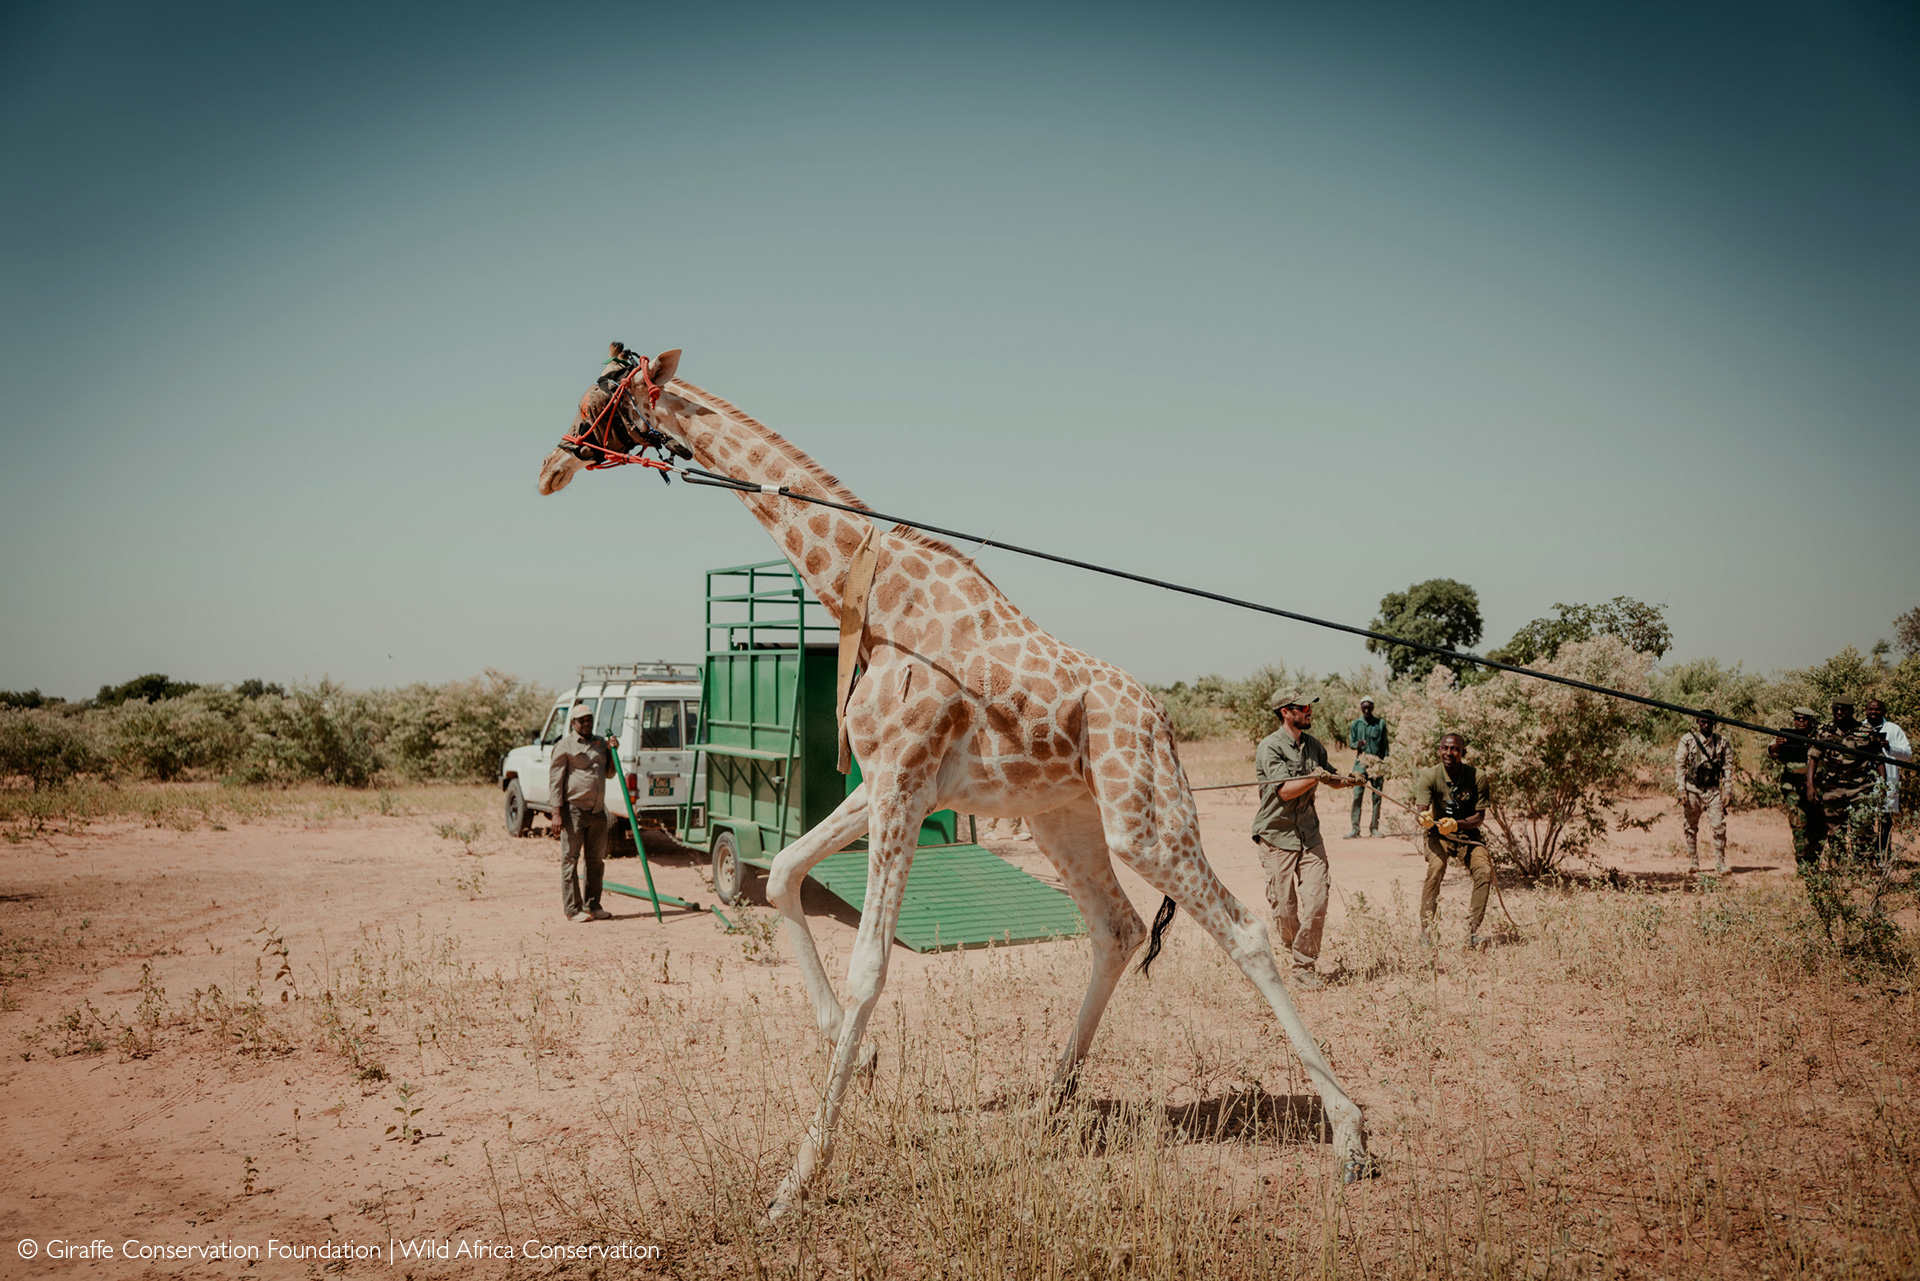 West African giraffe conservation success in after daring translocation - Africa Geographic